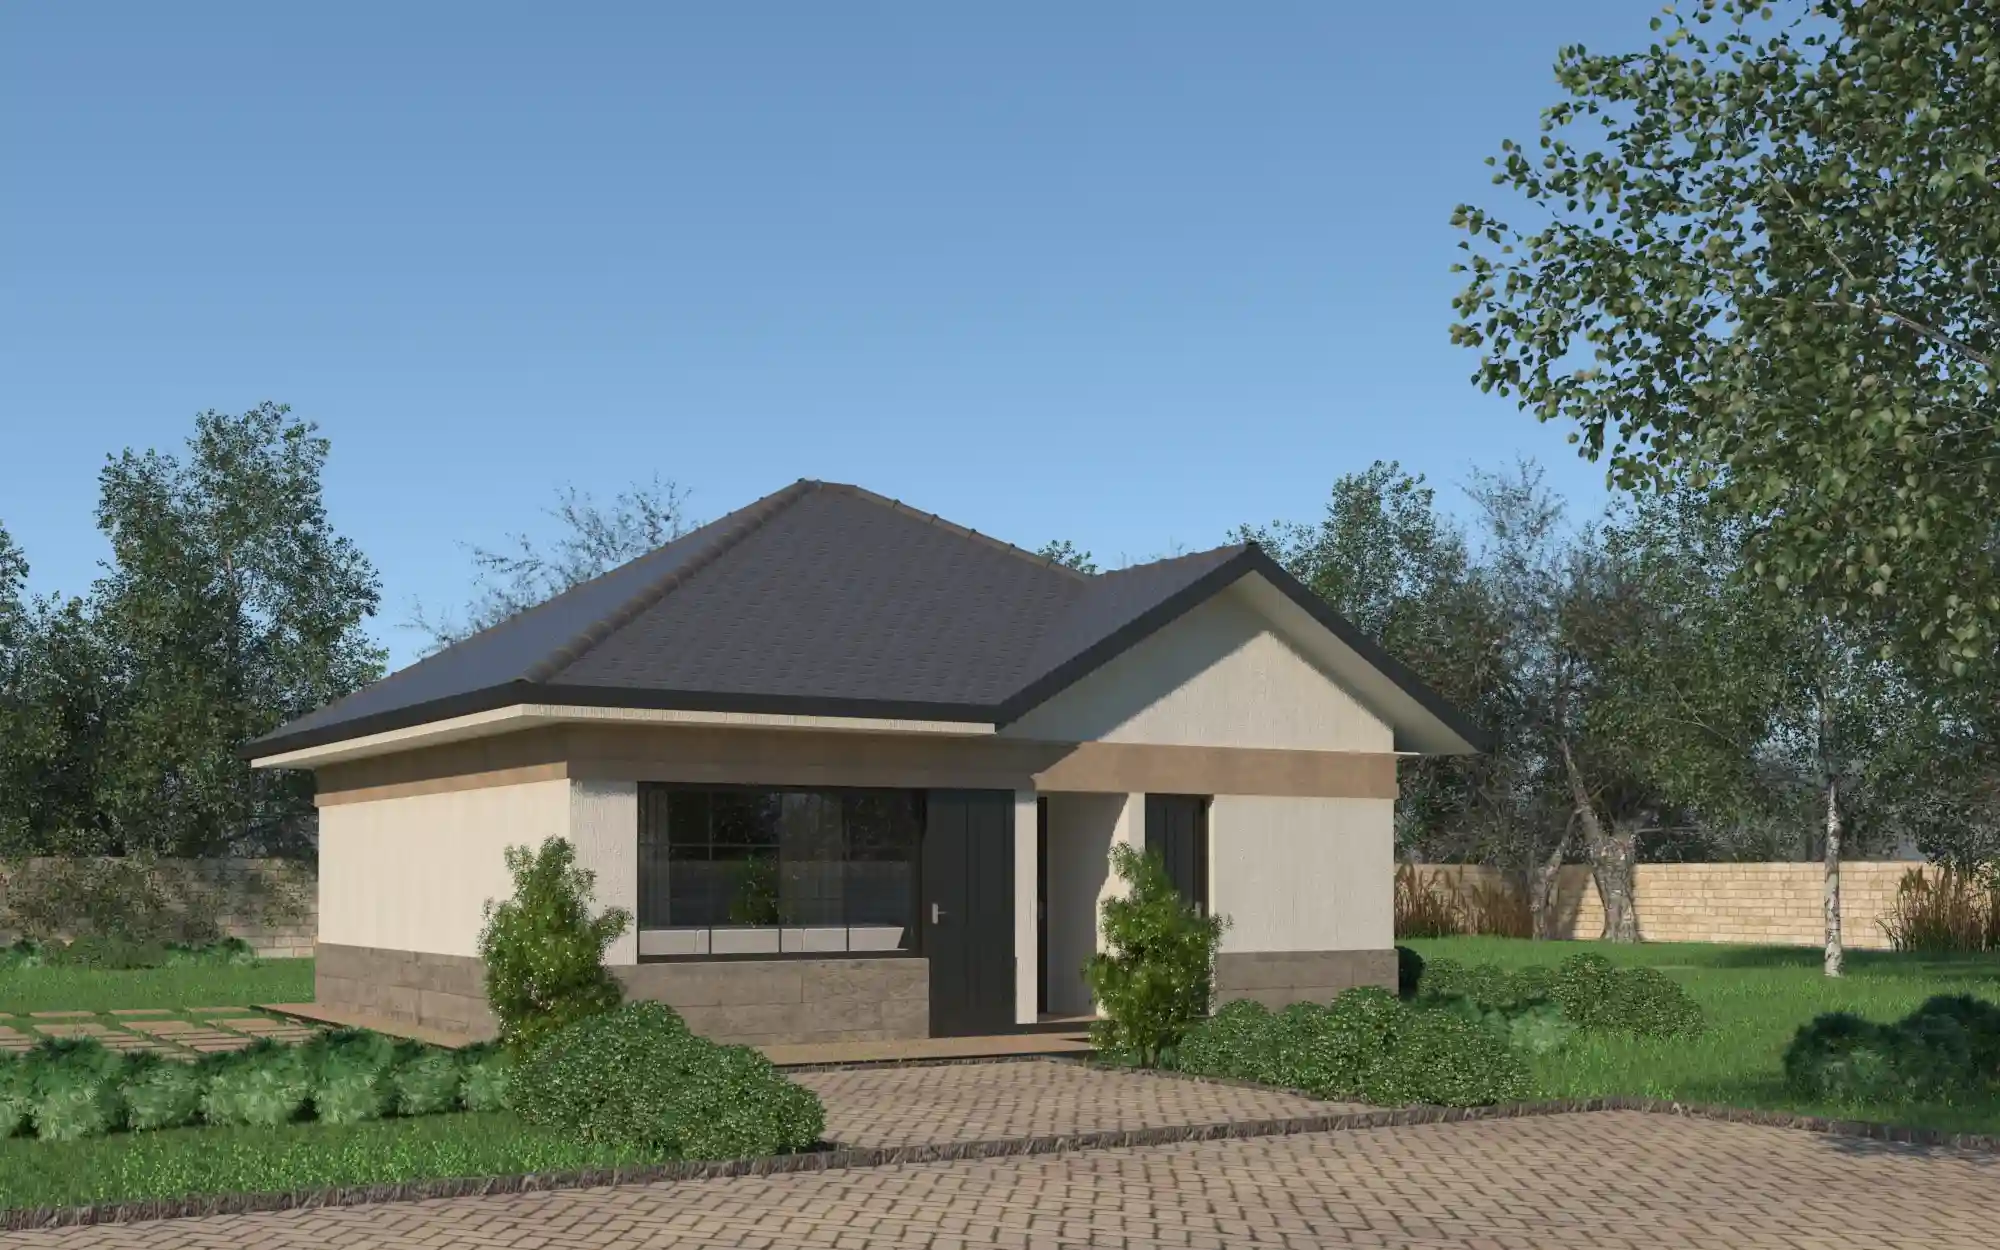 3 Bedroom Bungalow - ID 3191 - 3191_Phase2_Front.jpg from Inuua Tujenge house plans with 3 bedrooms and 2 bathrooms. ( jengapolepole )